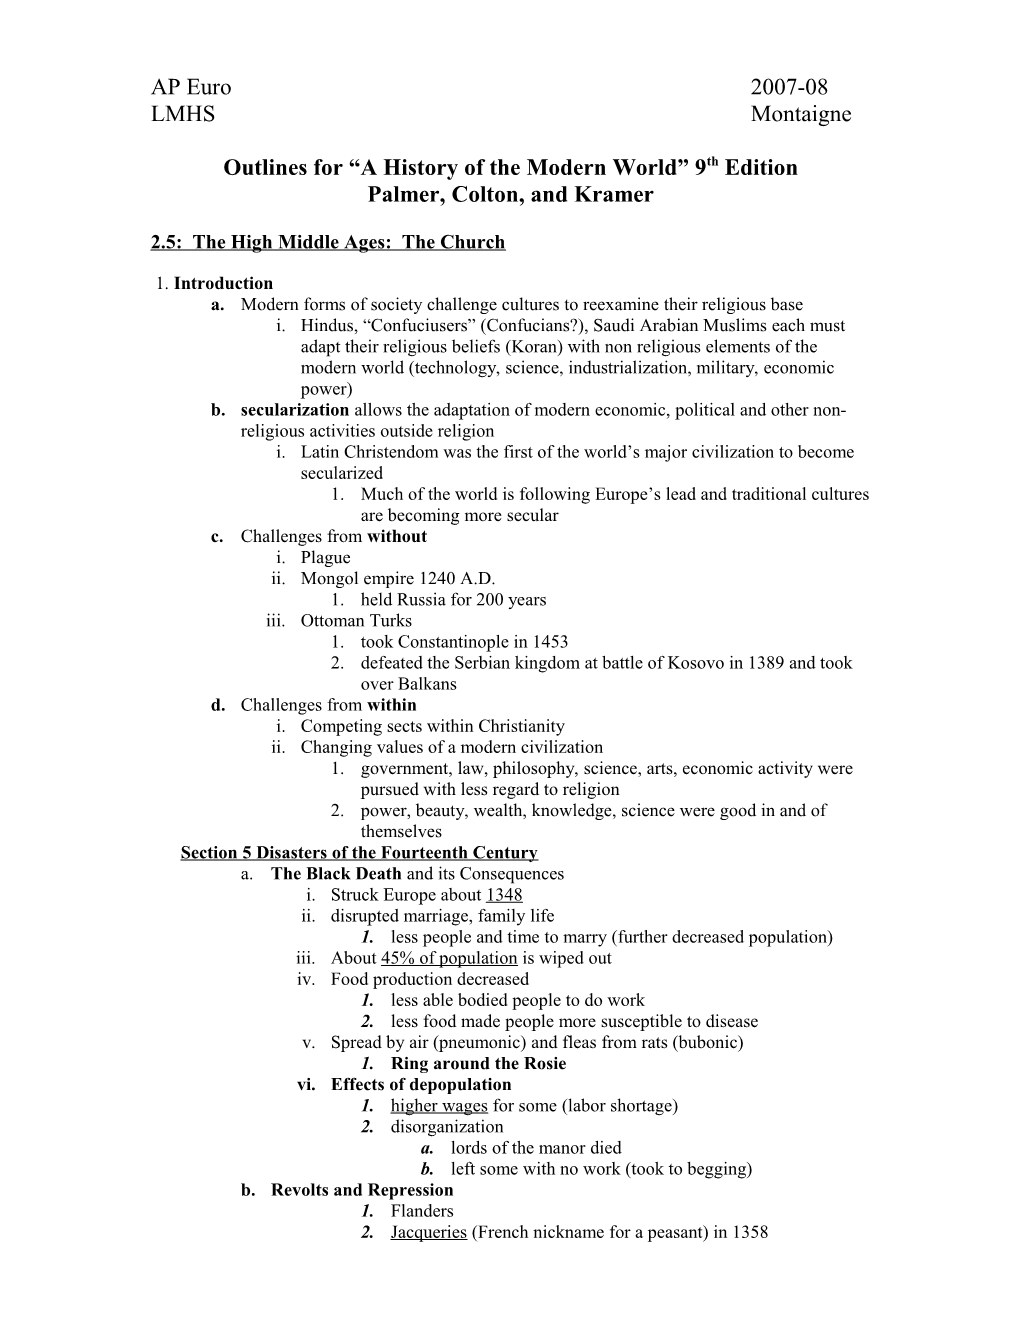 Outlines for a History of the Modern World 9Th Edition s1